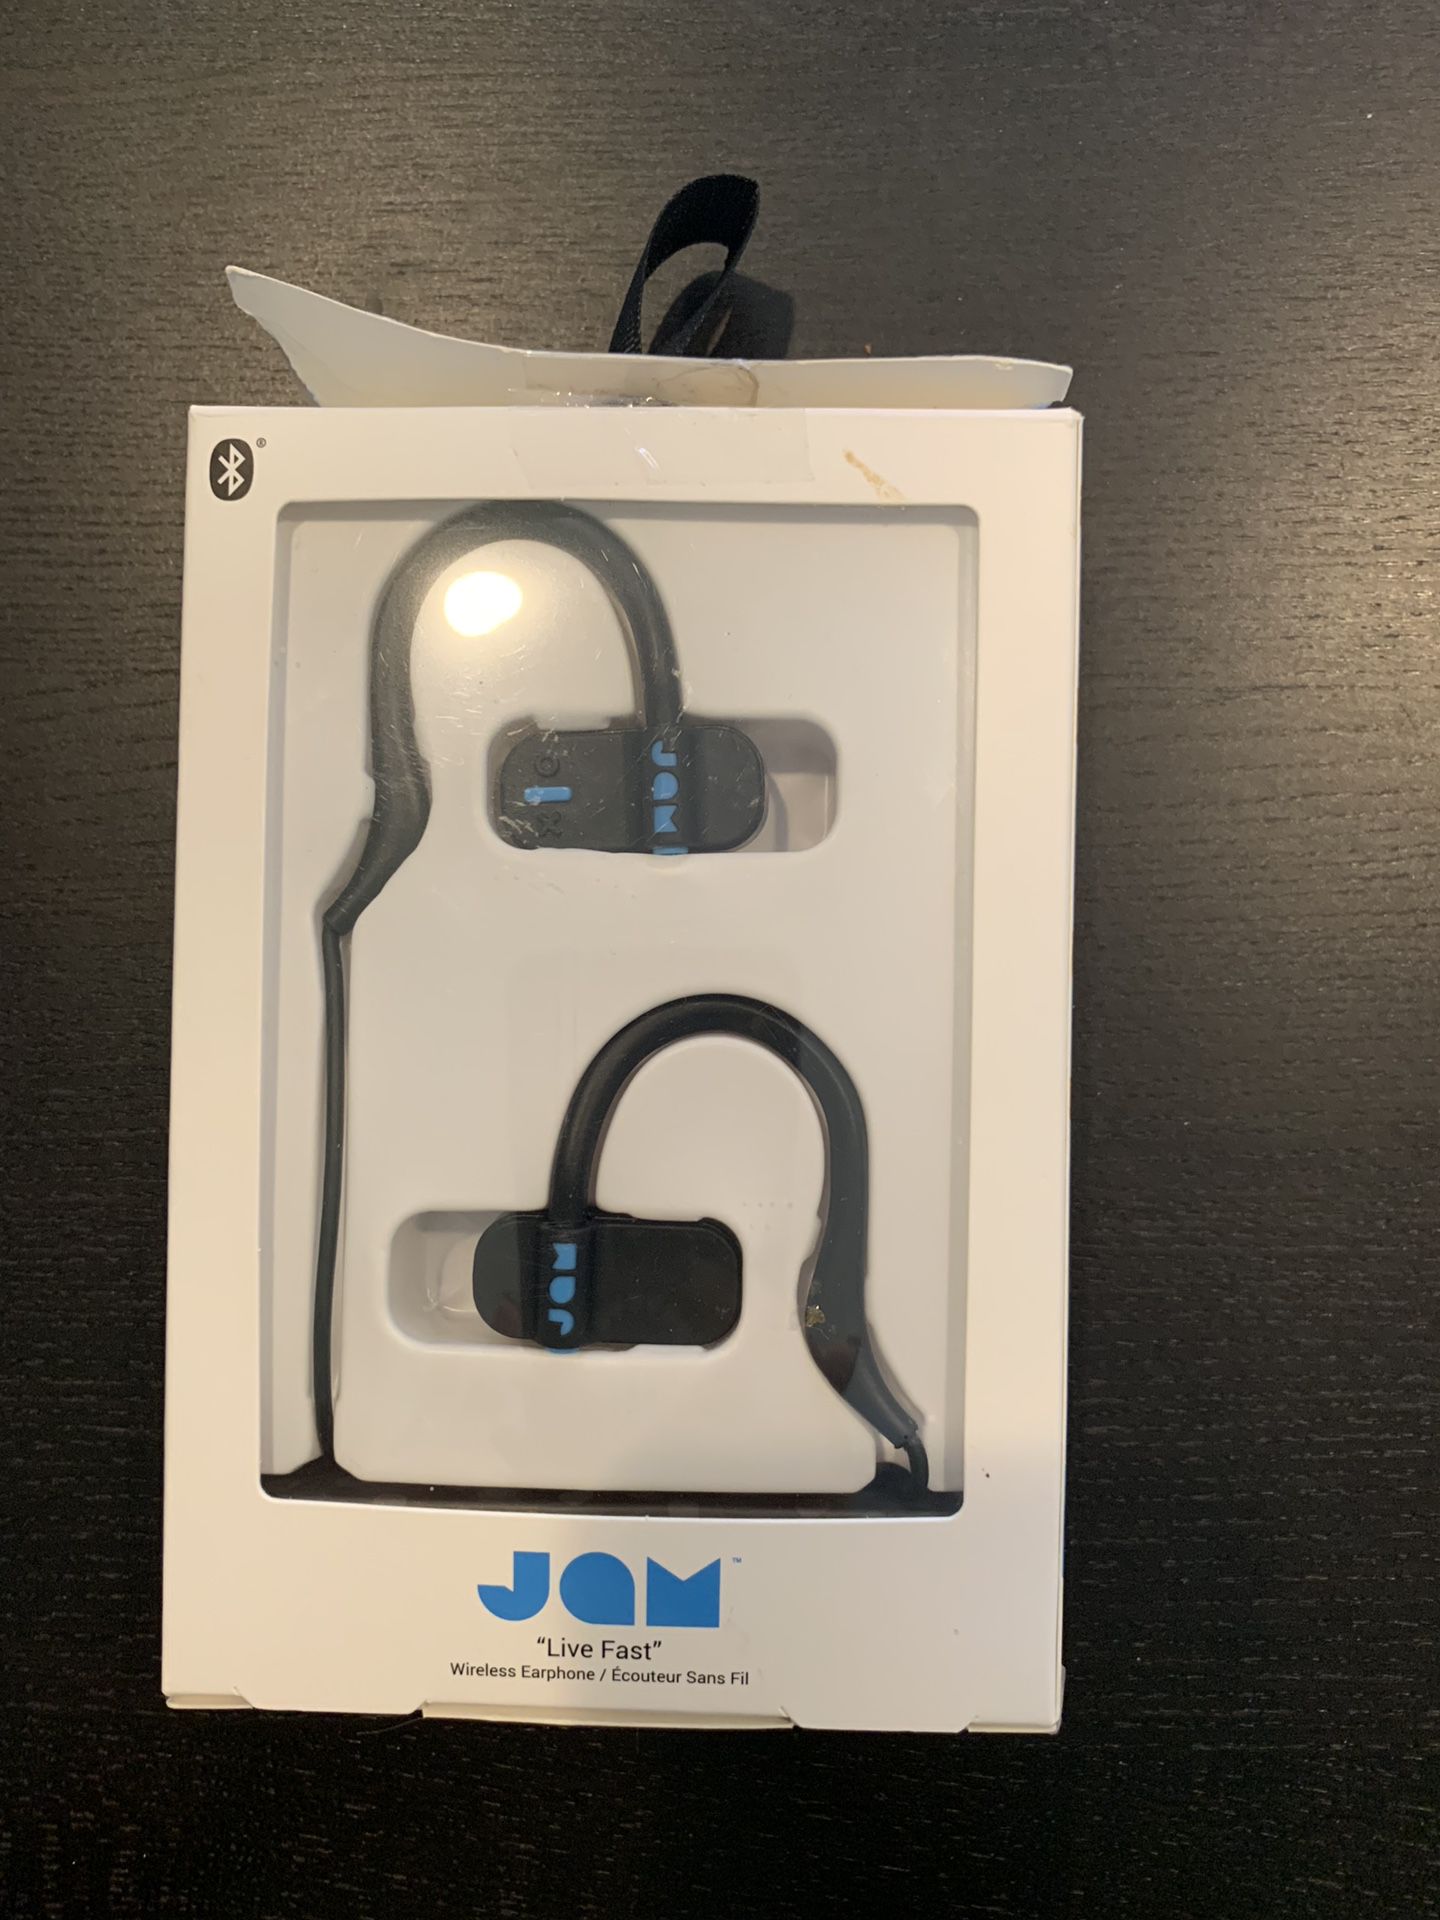 Jam live fast earbuds